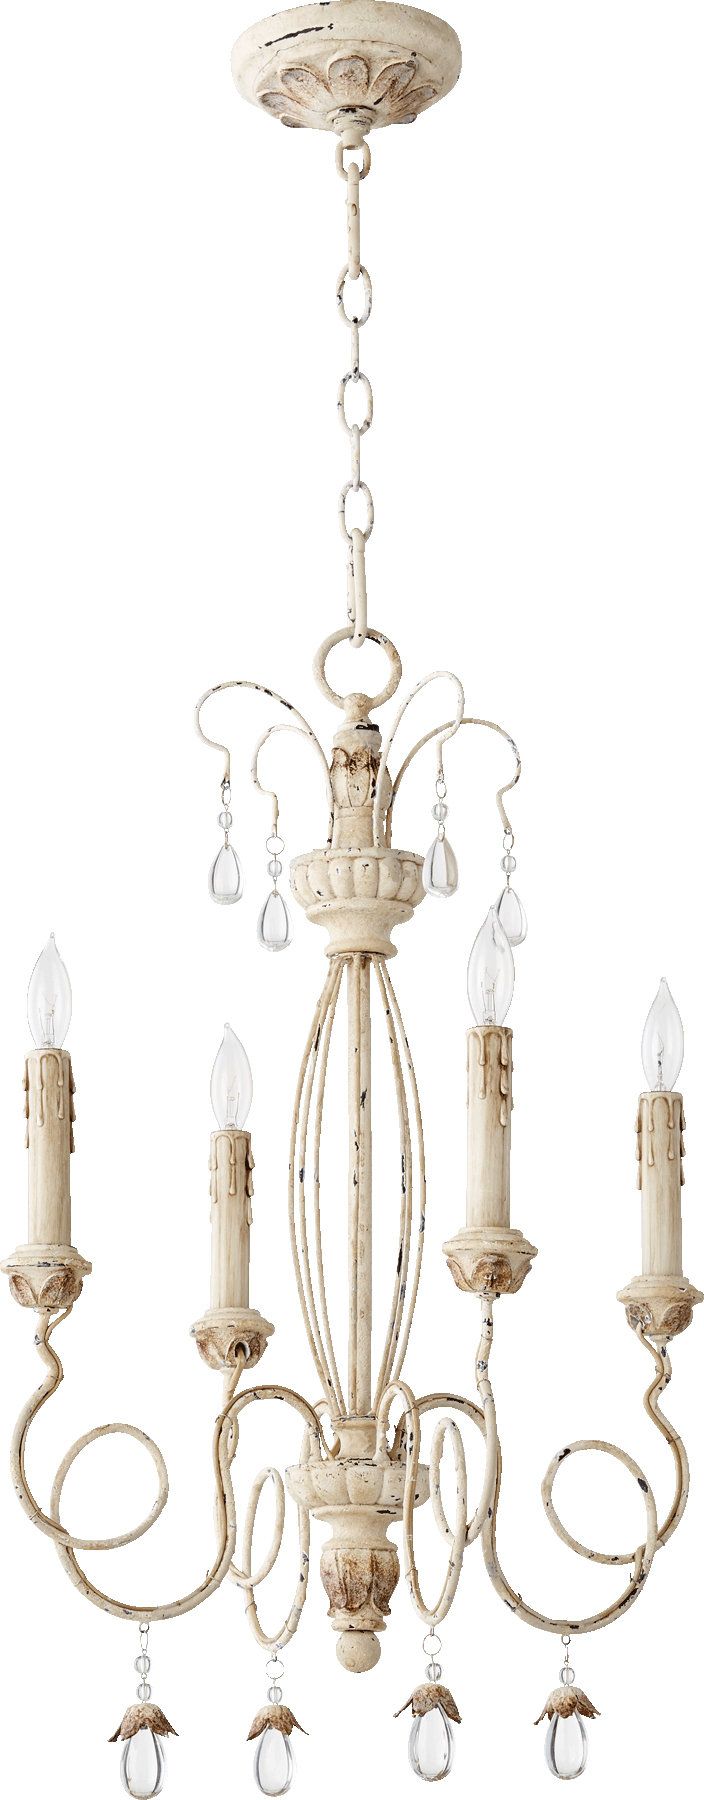 Best And Newest Baxley 4 Light Candle Style Chandelier Pertaining To Bennington 4 Light Candle Style Chandeliers (View 13 of 25)